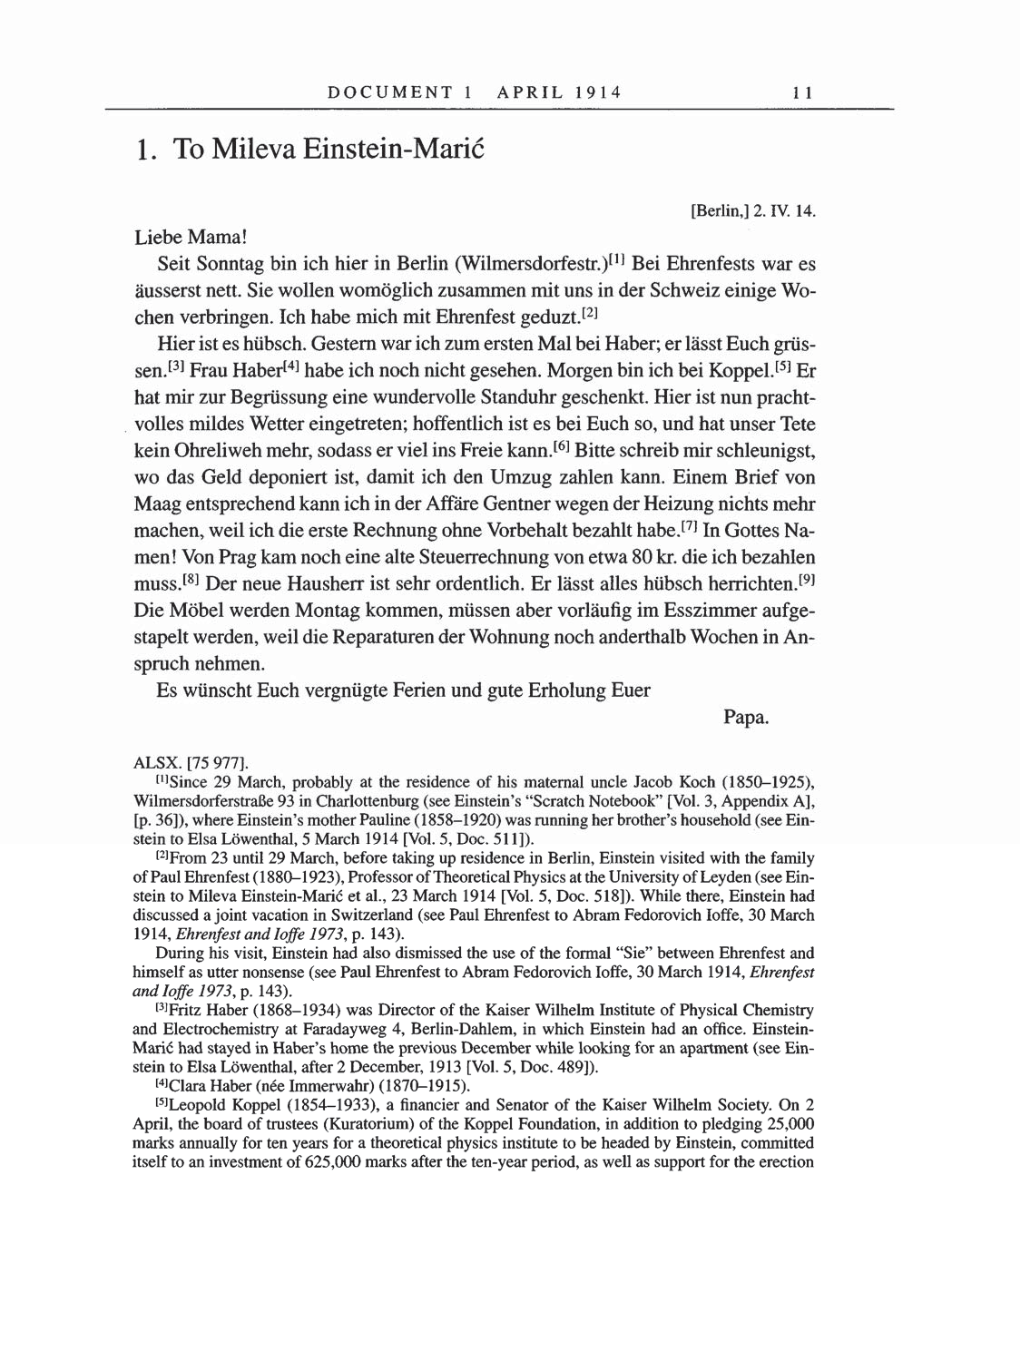 Volume 8, Part A: The Berlin Years: Correspondence 1914-1917 page 11